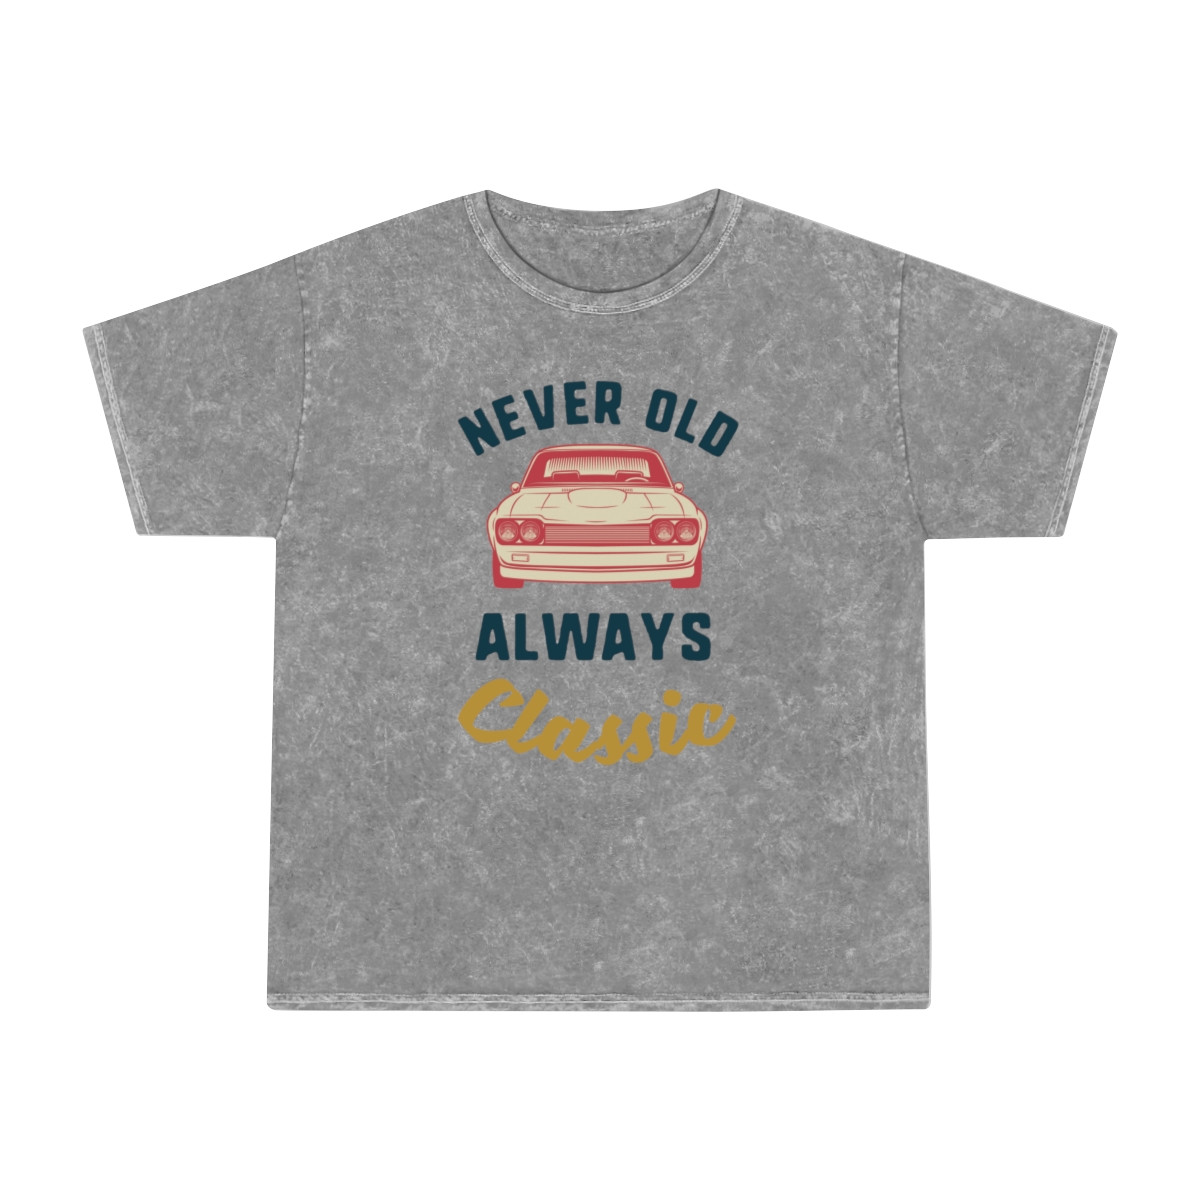 Never Old Always Classic Unisex Mineral Wash T-Shirt